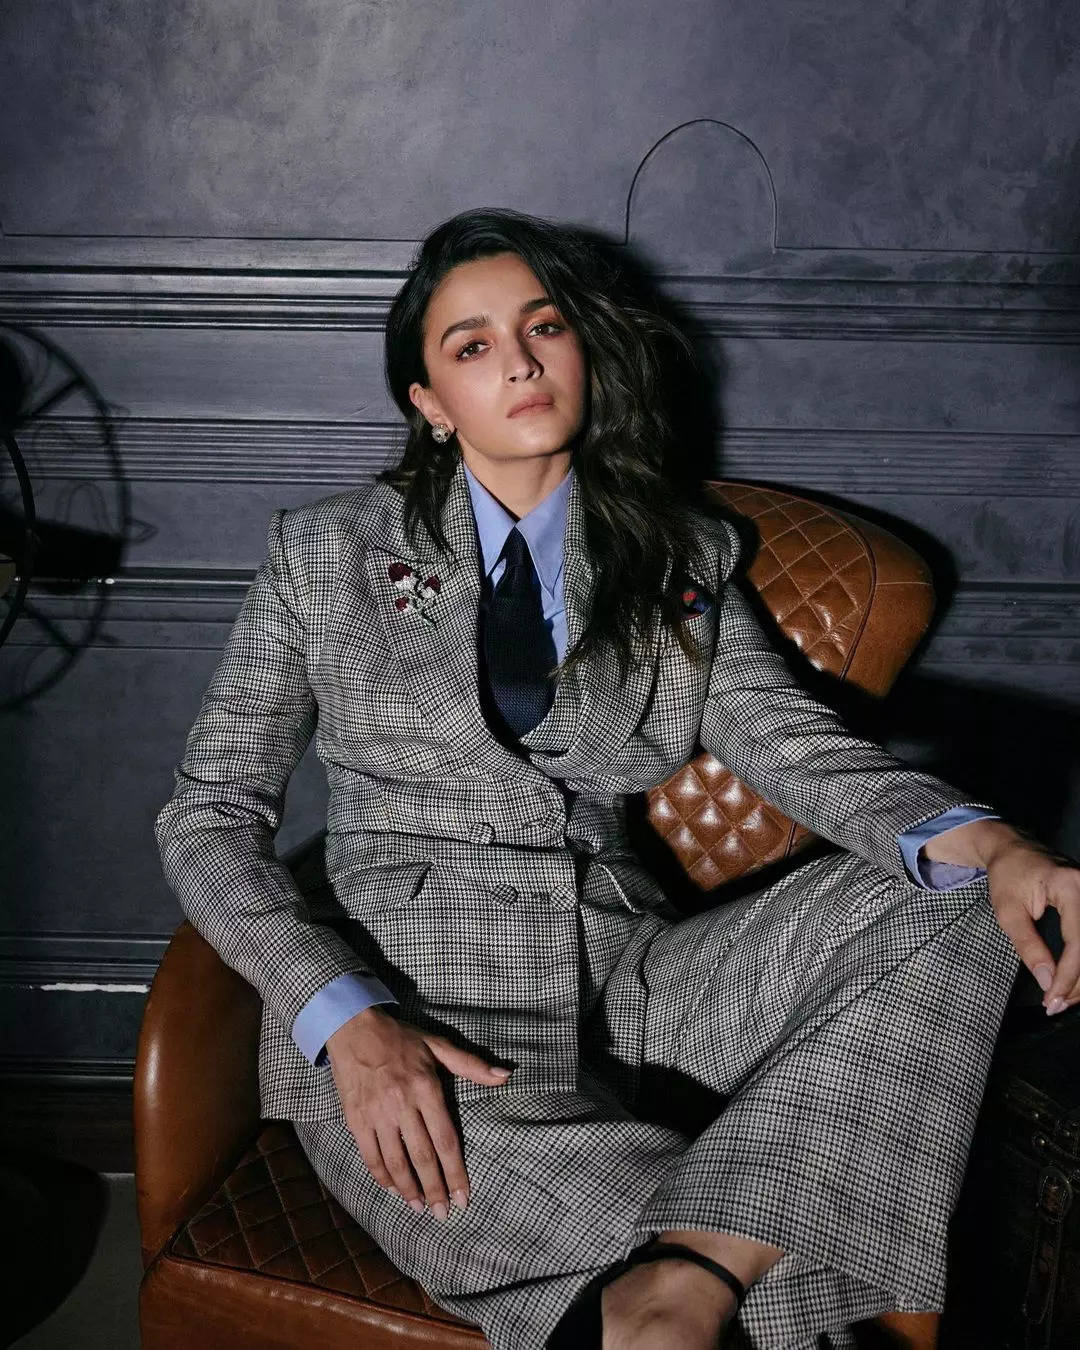 Alia Bhatt becomes first Indian global ambassador of Gucci, after